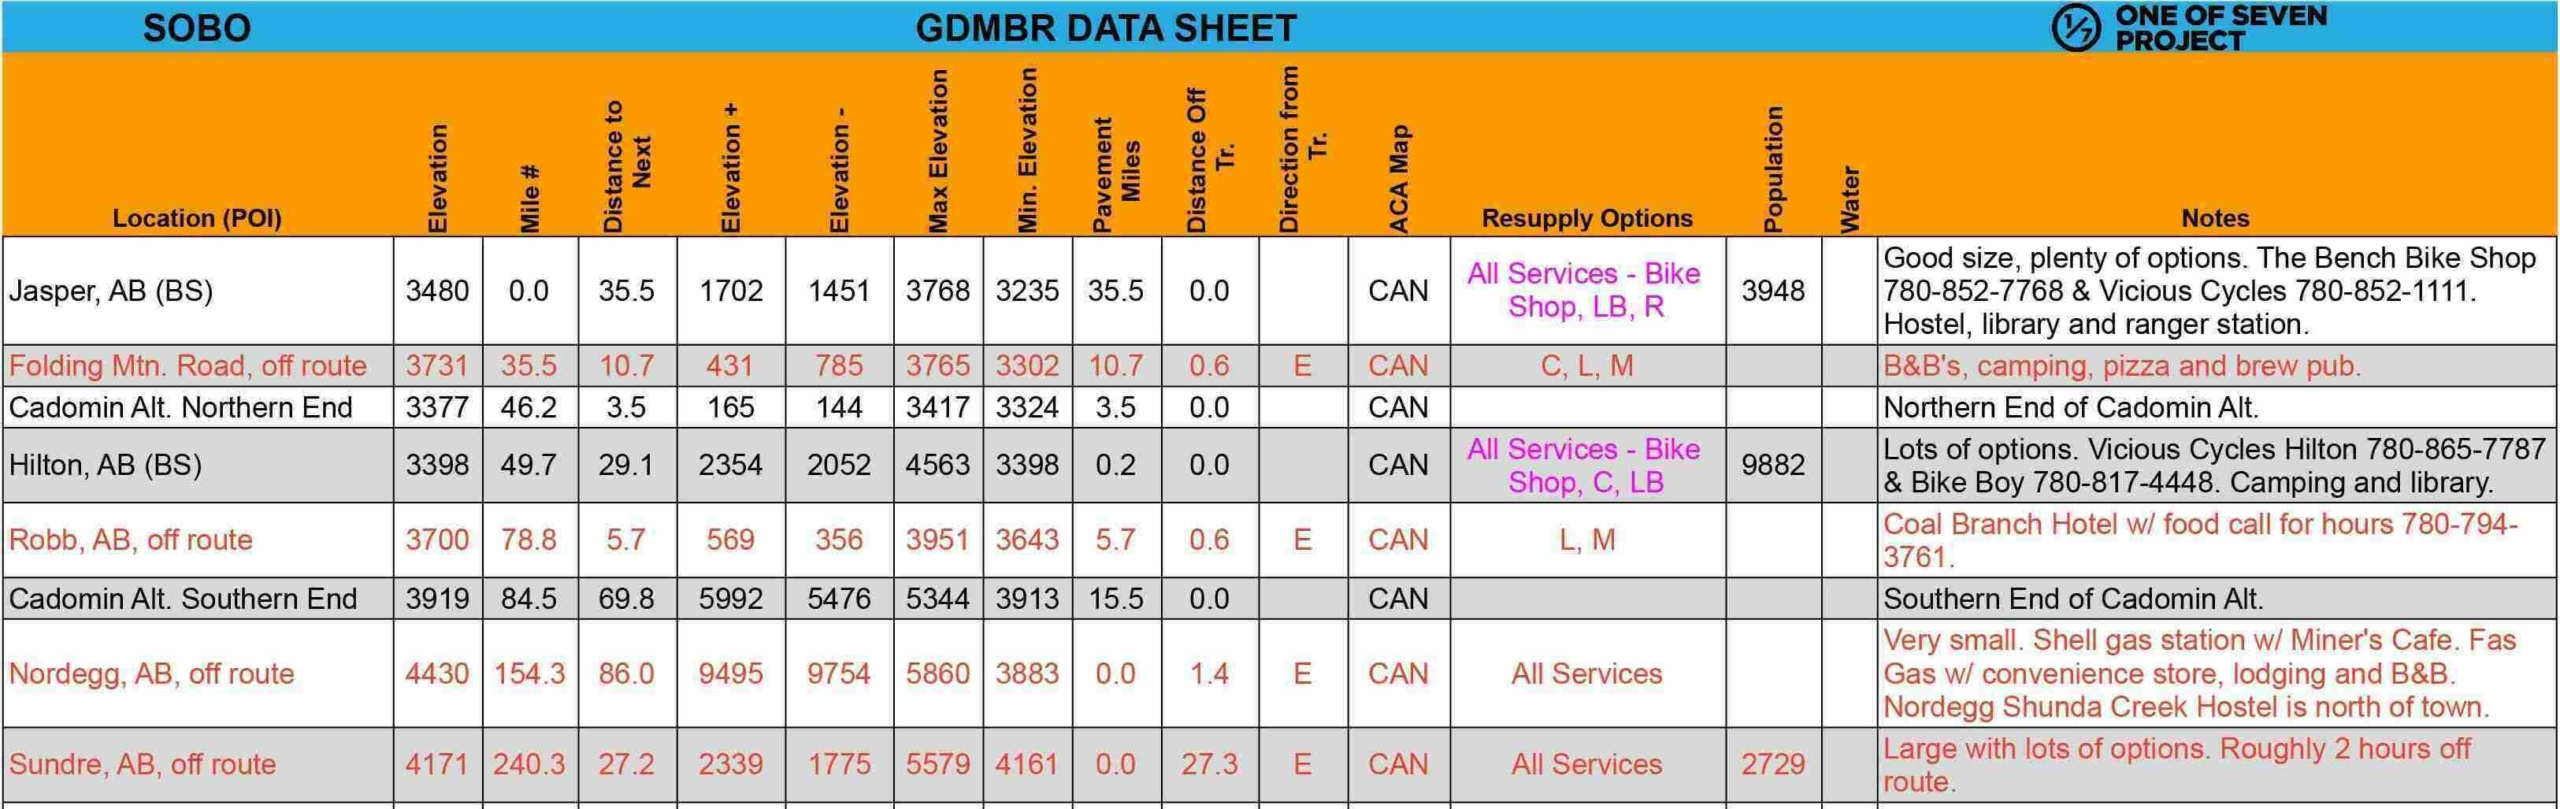 GDMBR, Data Sheet example- bikeepacking guide planning aids